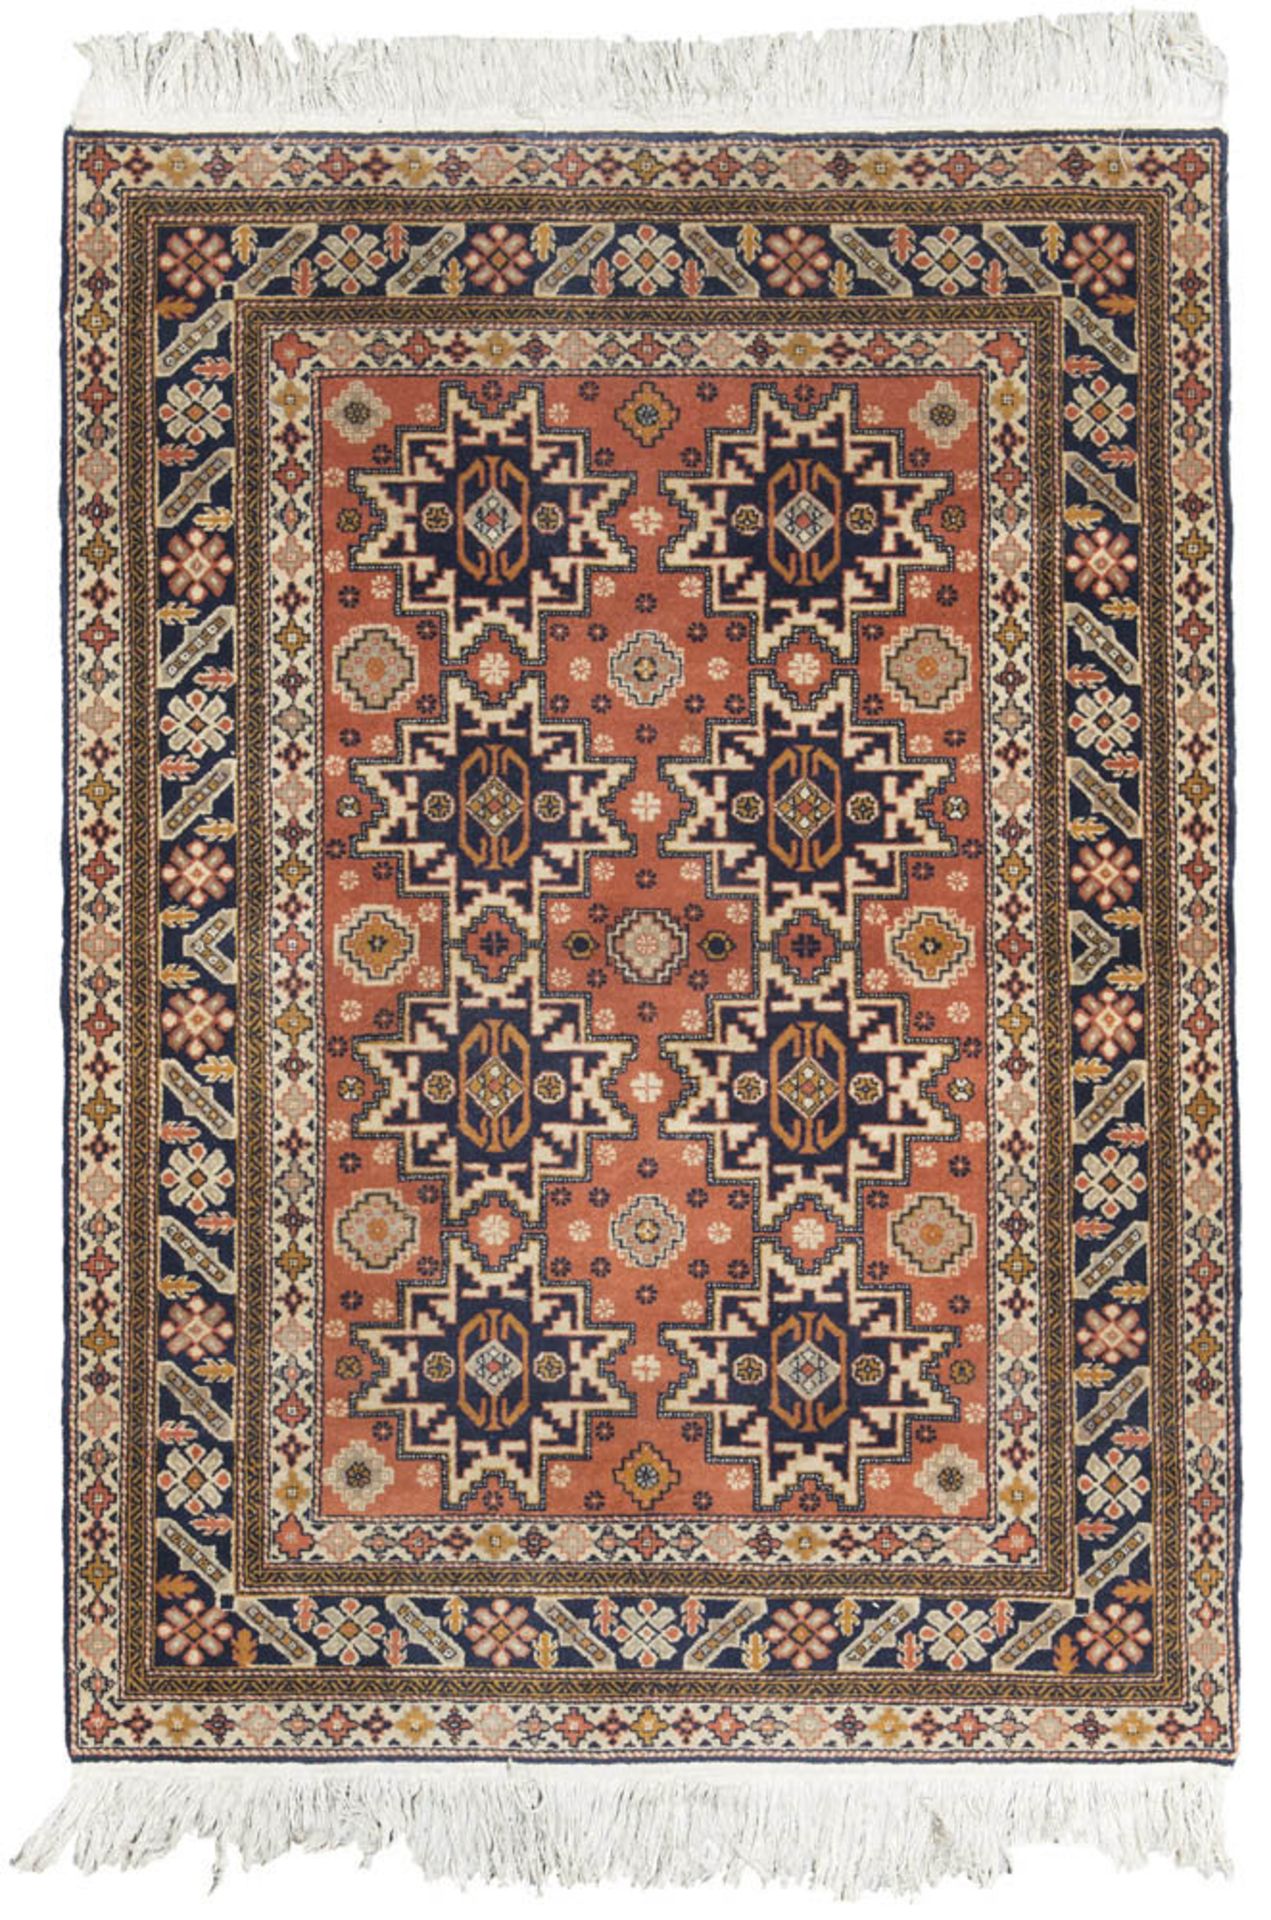 SHIRWAN LESGHI CARPET, 20TH CENTURY with design of sequence of stars and secondary motifs to